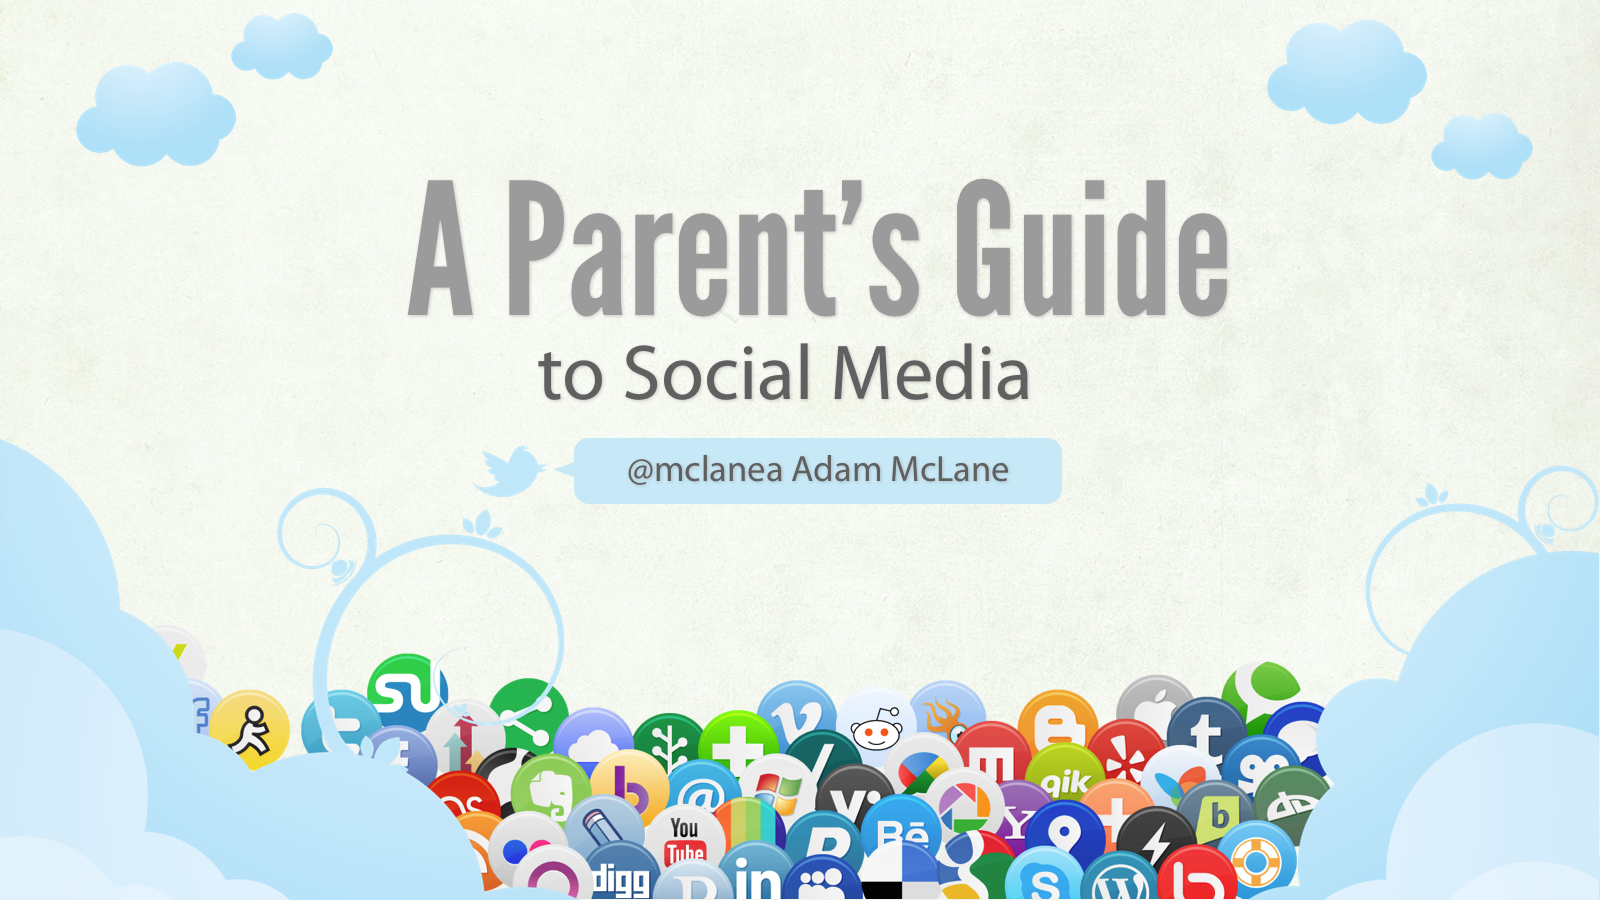 http://adammclane.com/wp-content/uploads/2012/01/A-Parents-Guide-to-Social-Media-Keynote.png